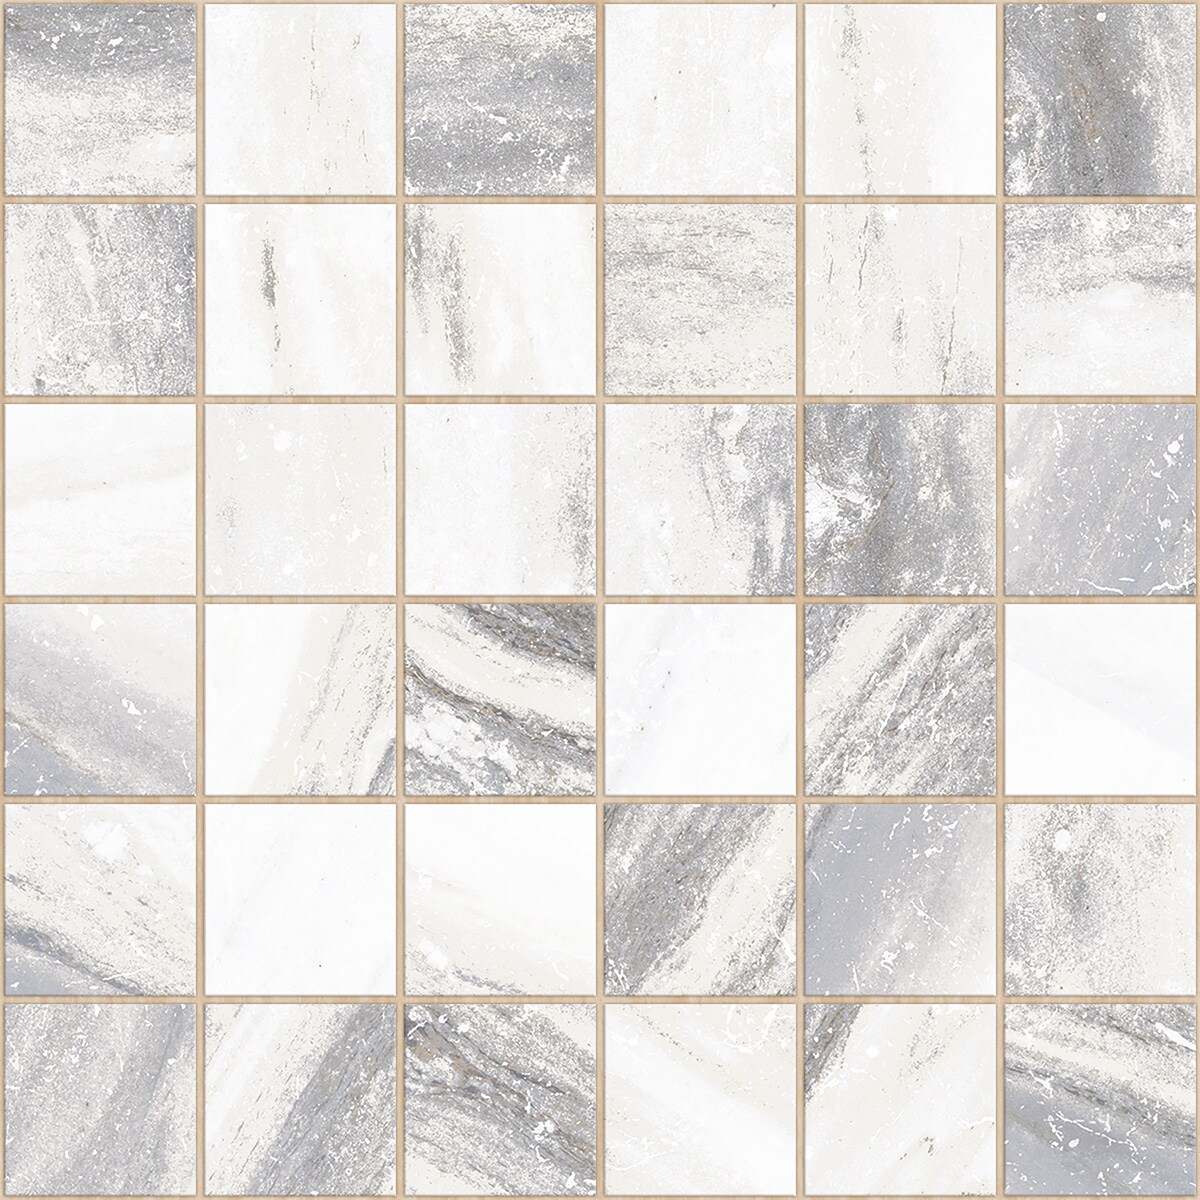 Black and white Tile at Lowes.com